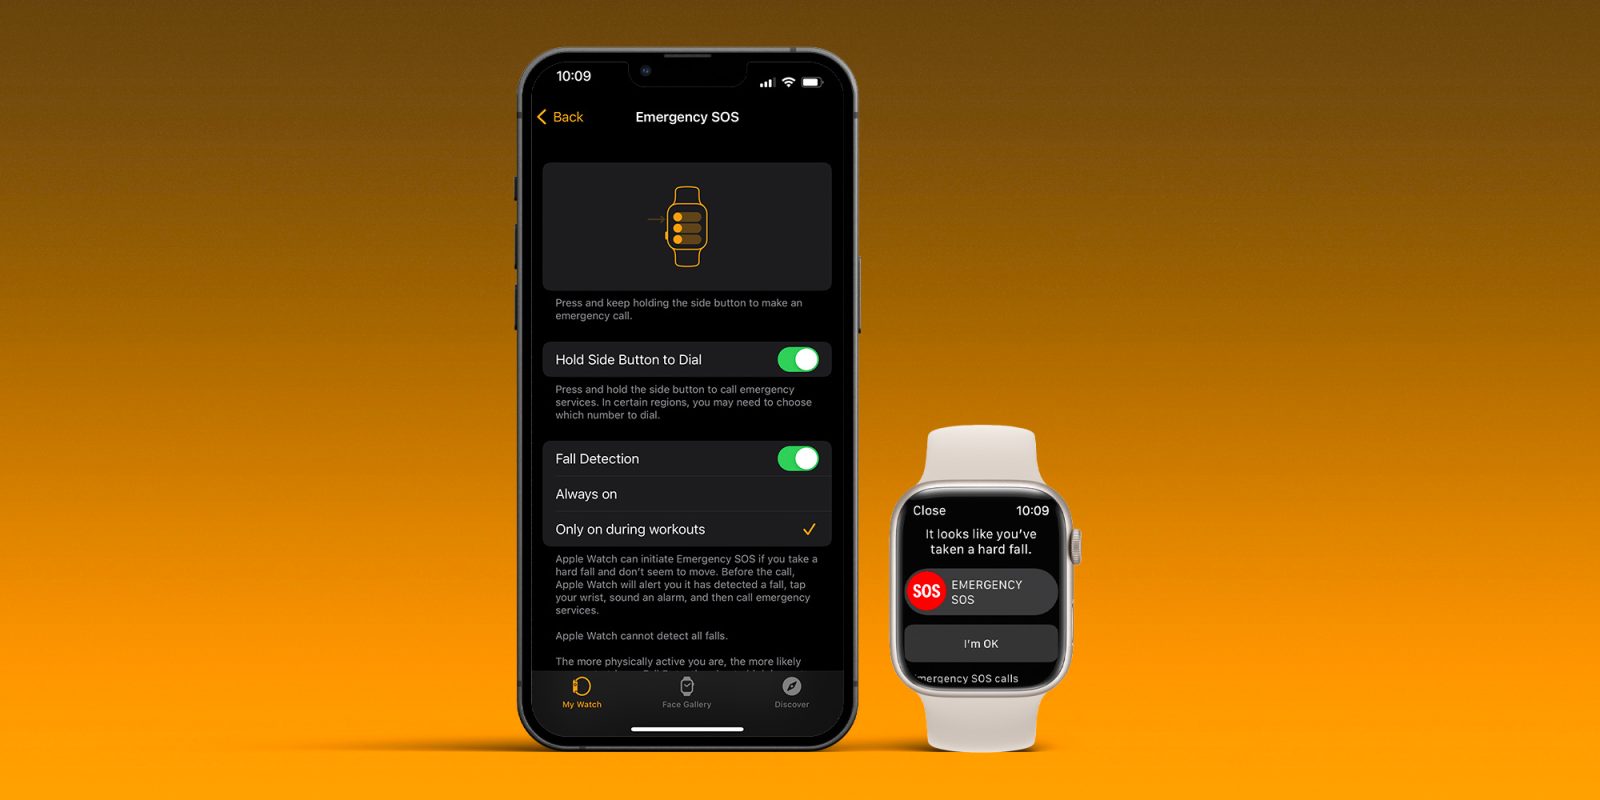 Apple Watch fall detection helps hiker get help after after near-fatal fall